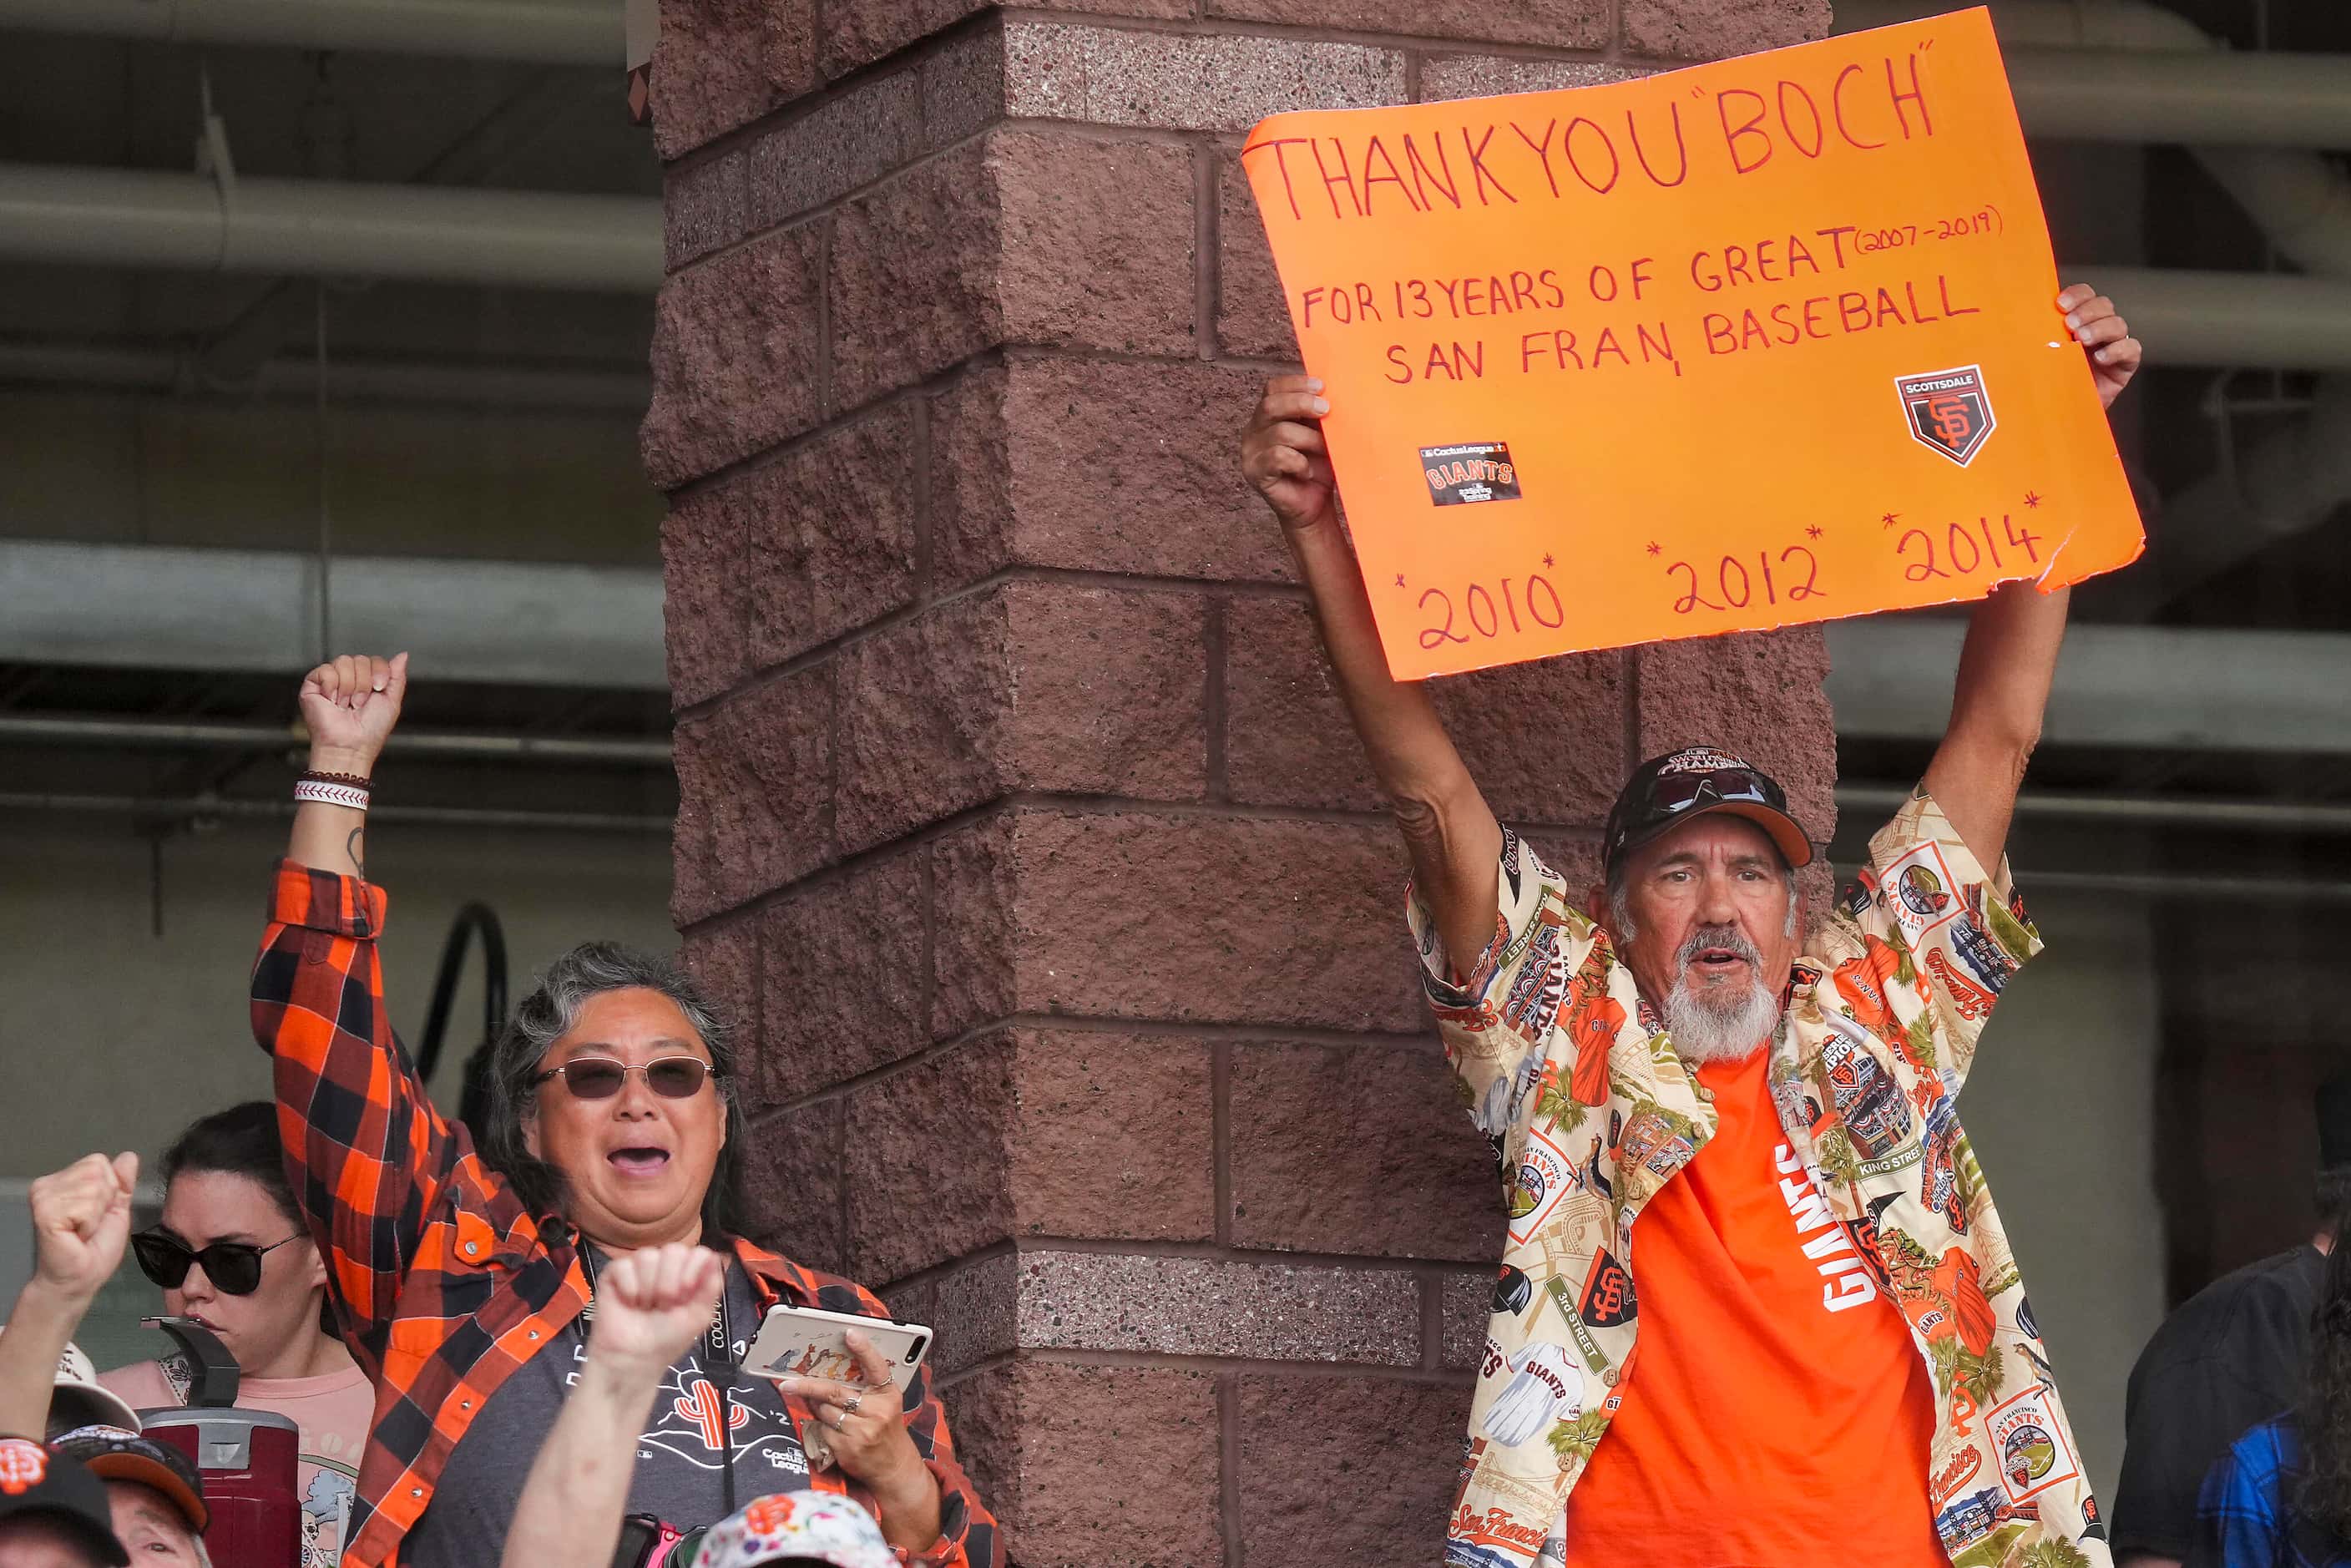 San Francisco Giants fans cheer Texas Rangers manager Bruce Bochy during ceremonies...